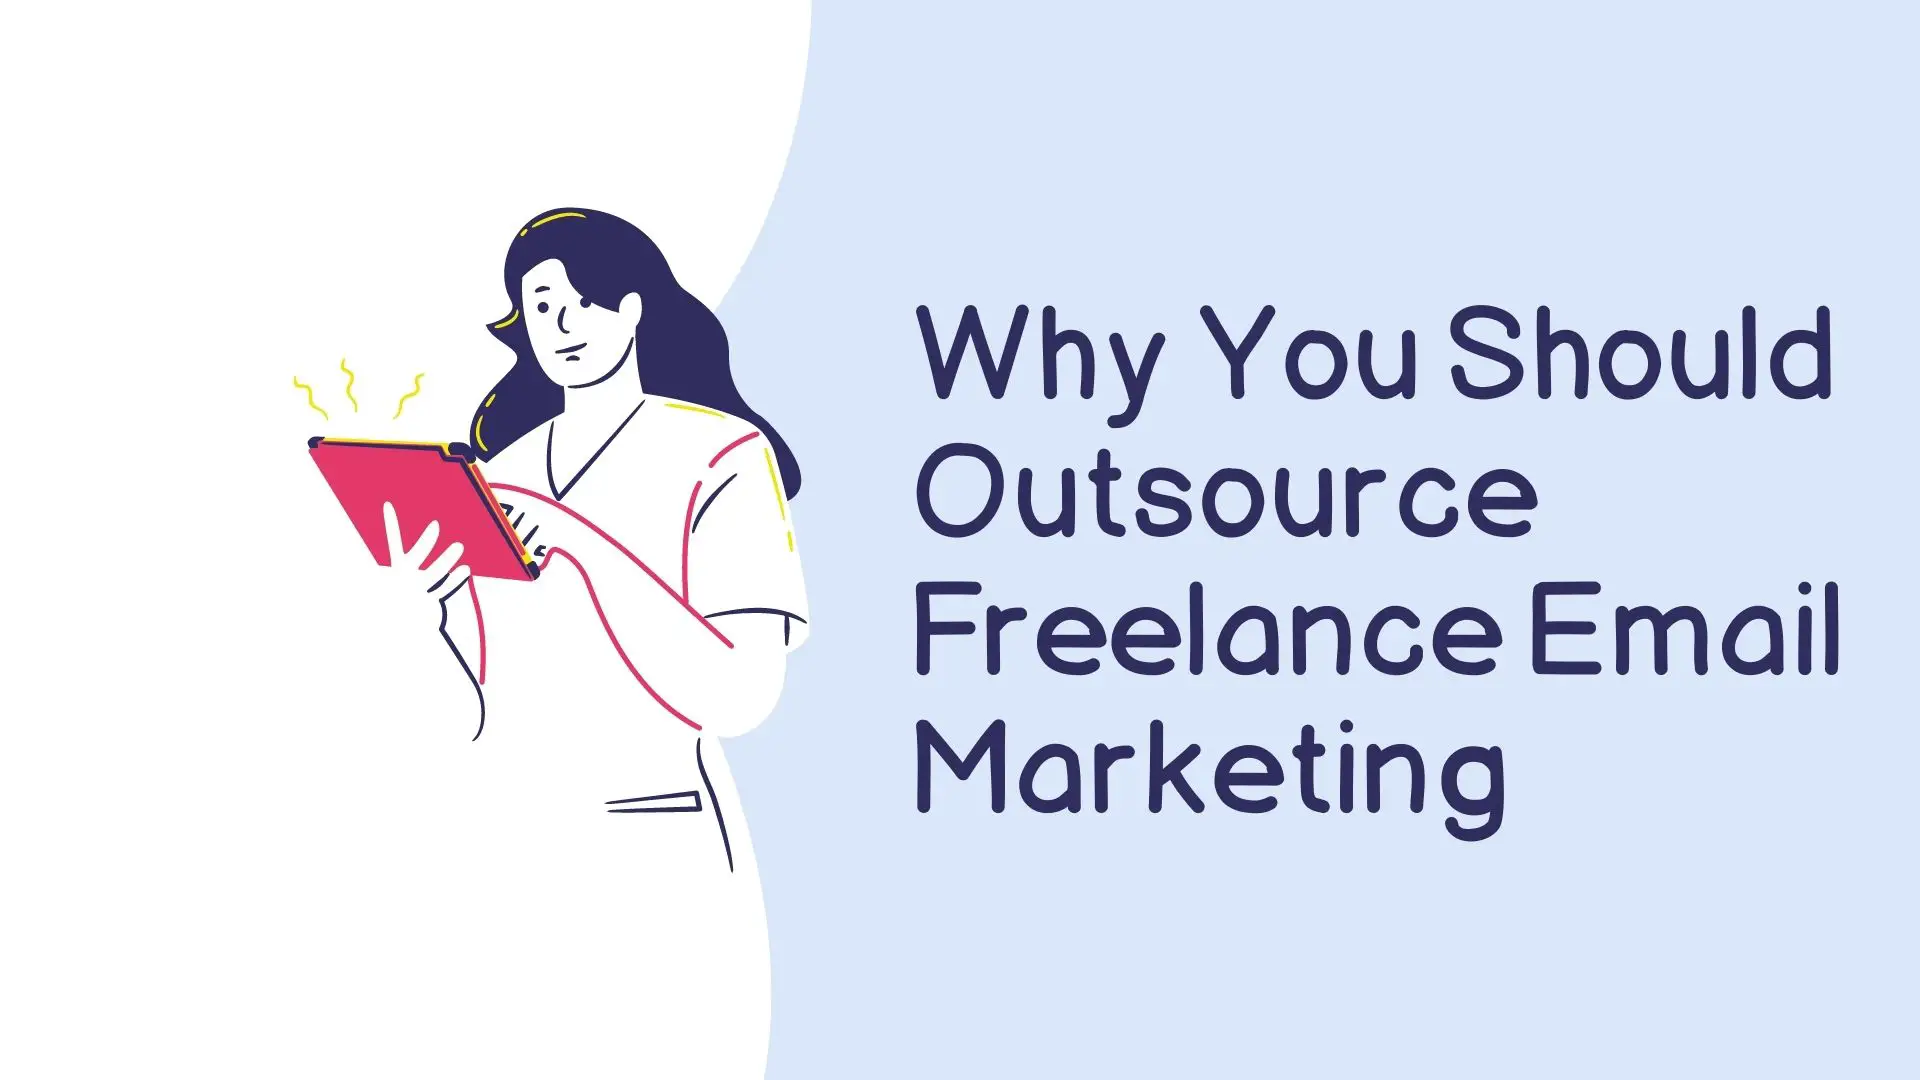 Why You Should Outsource Freelance Email Marketing